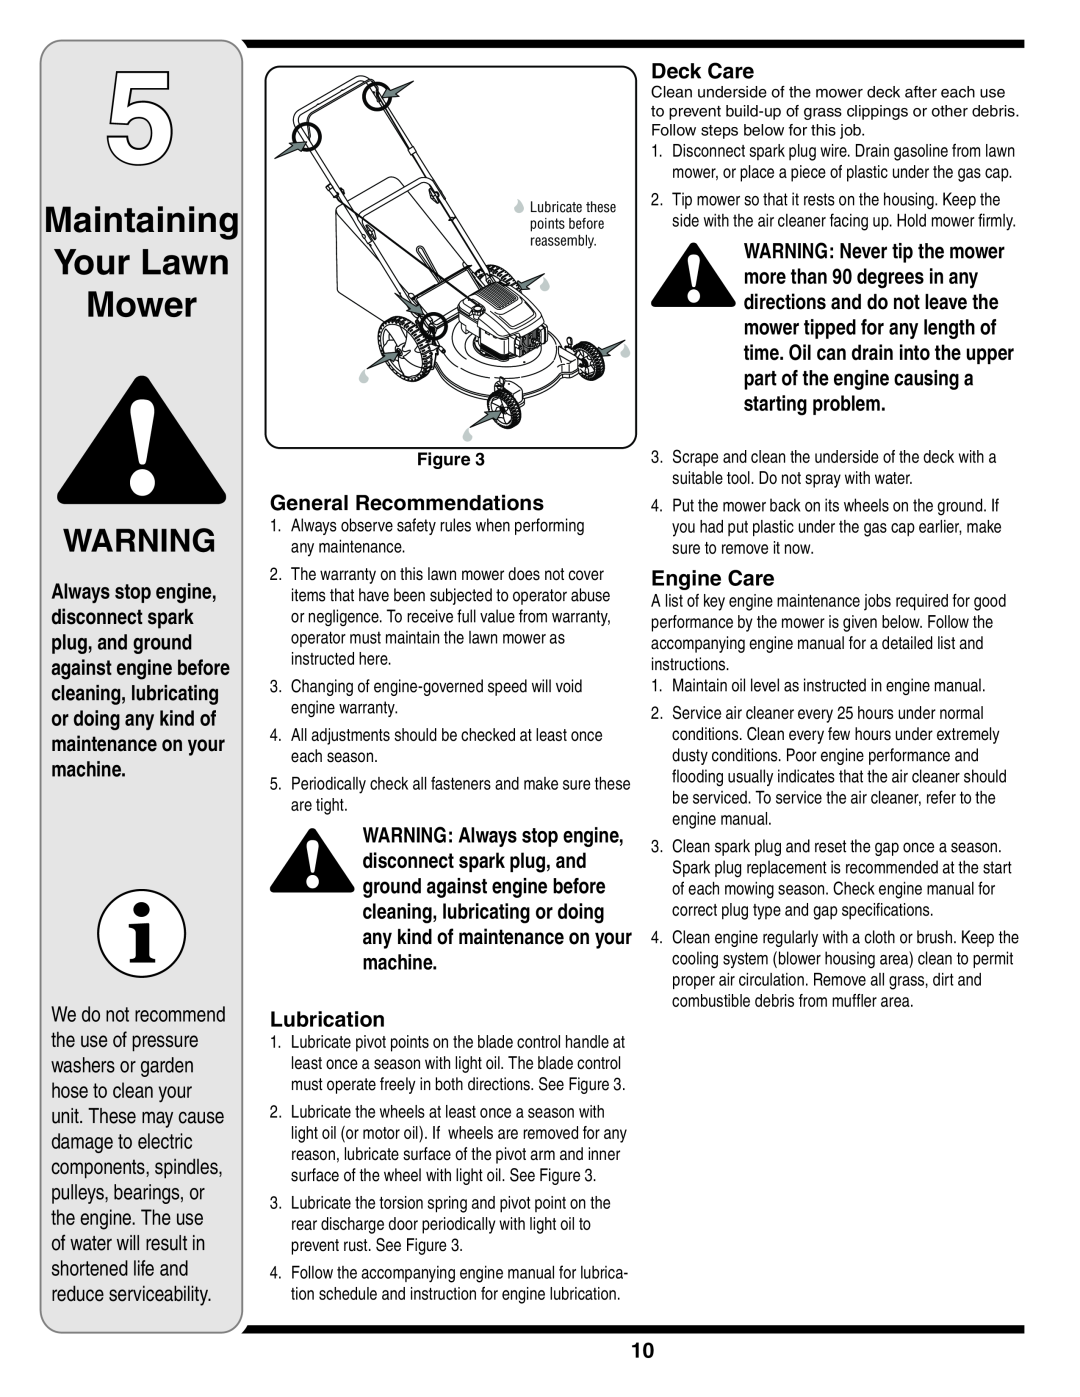 MTD 584 warranty Maintaining Your Lawn Mower, Deck Care, General Recommendations, Lubrication, Engine Care 